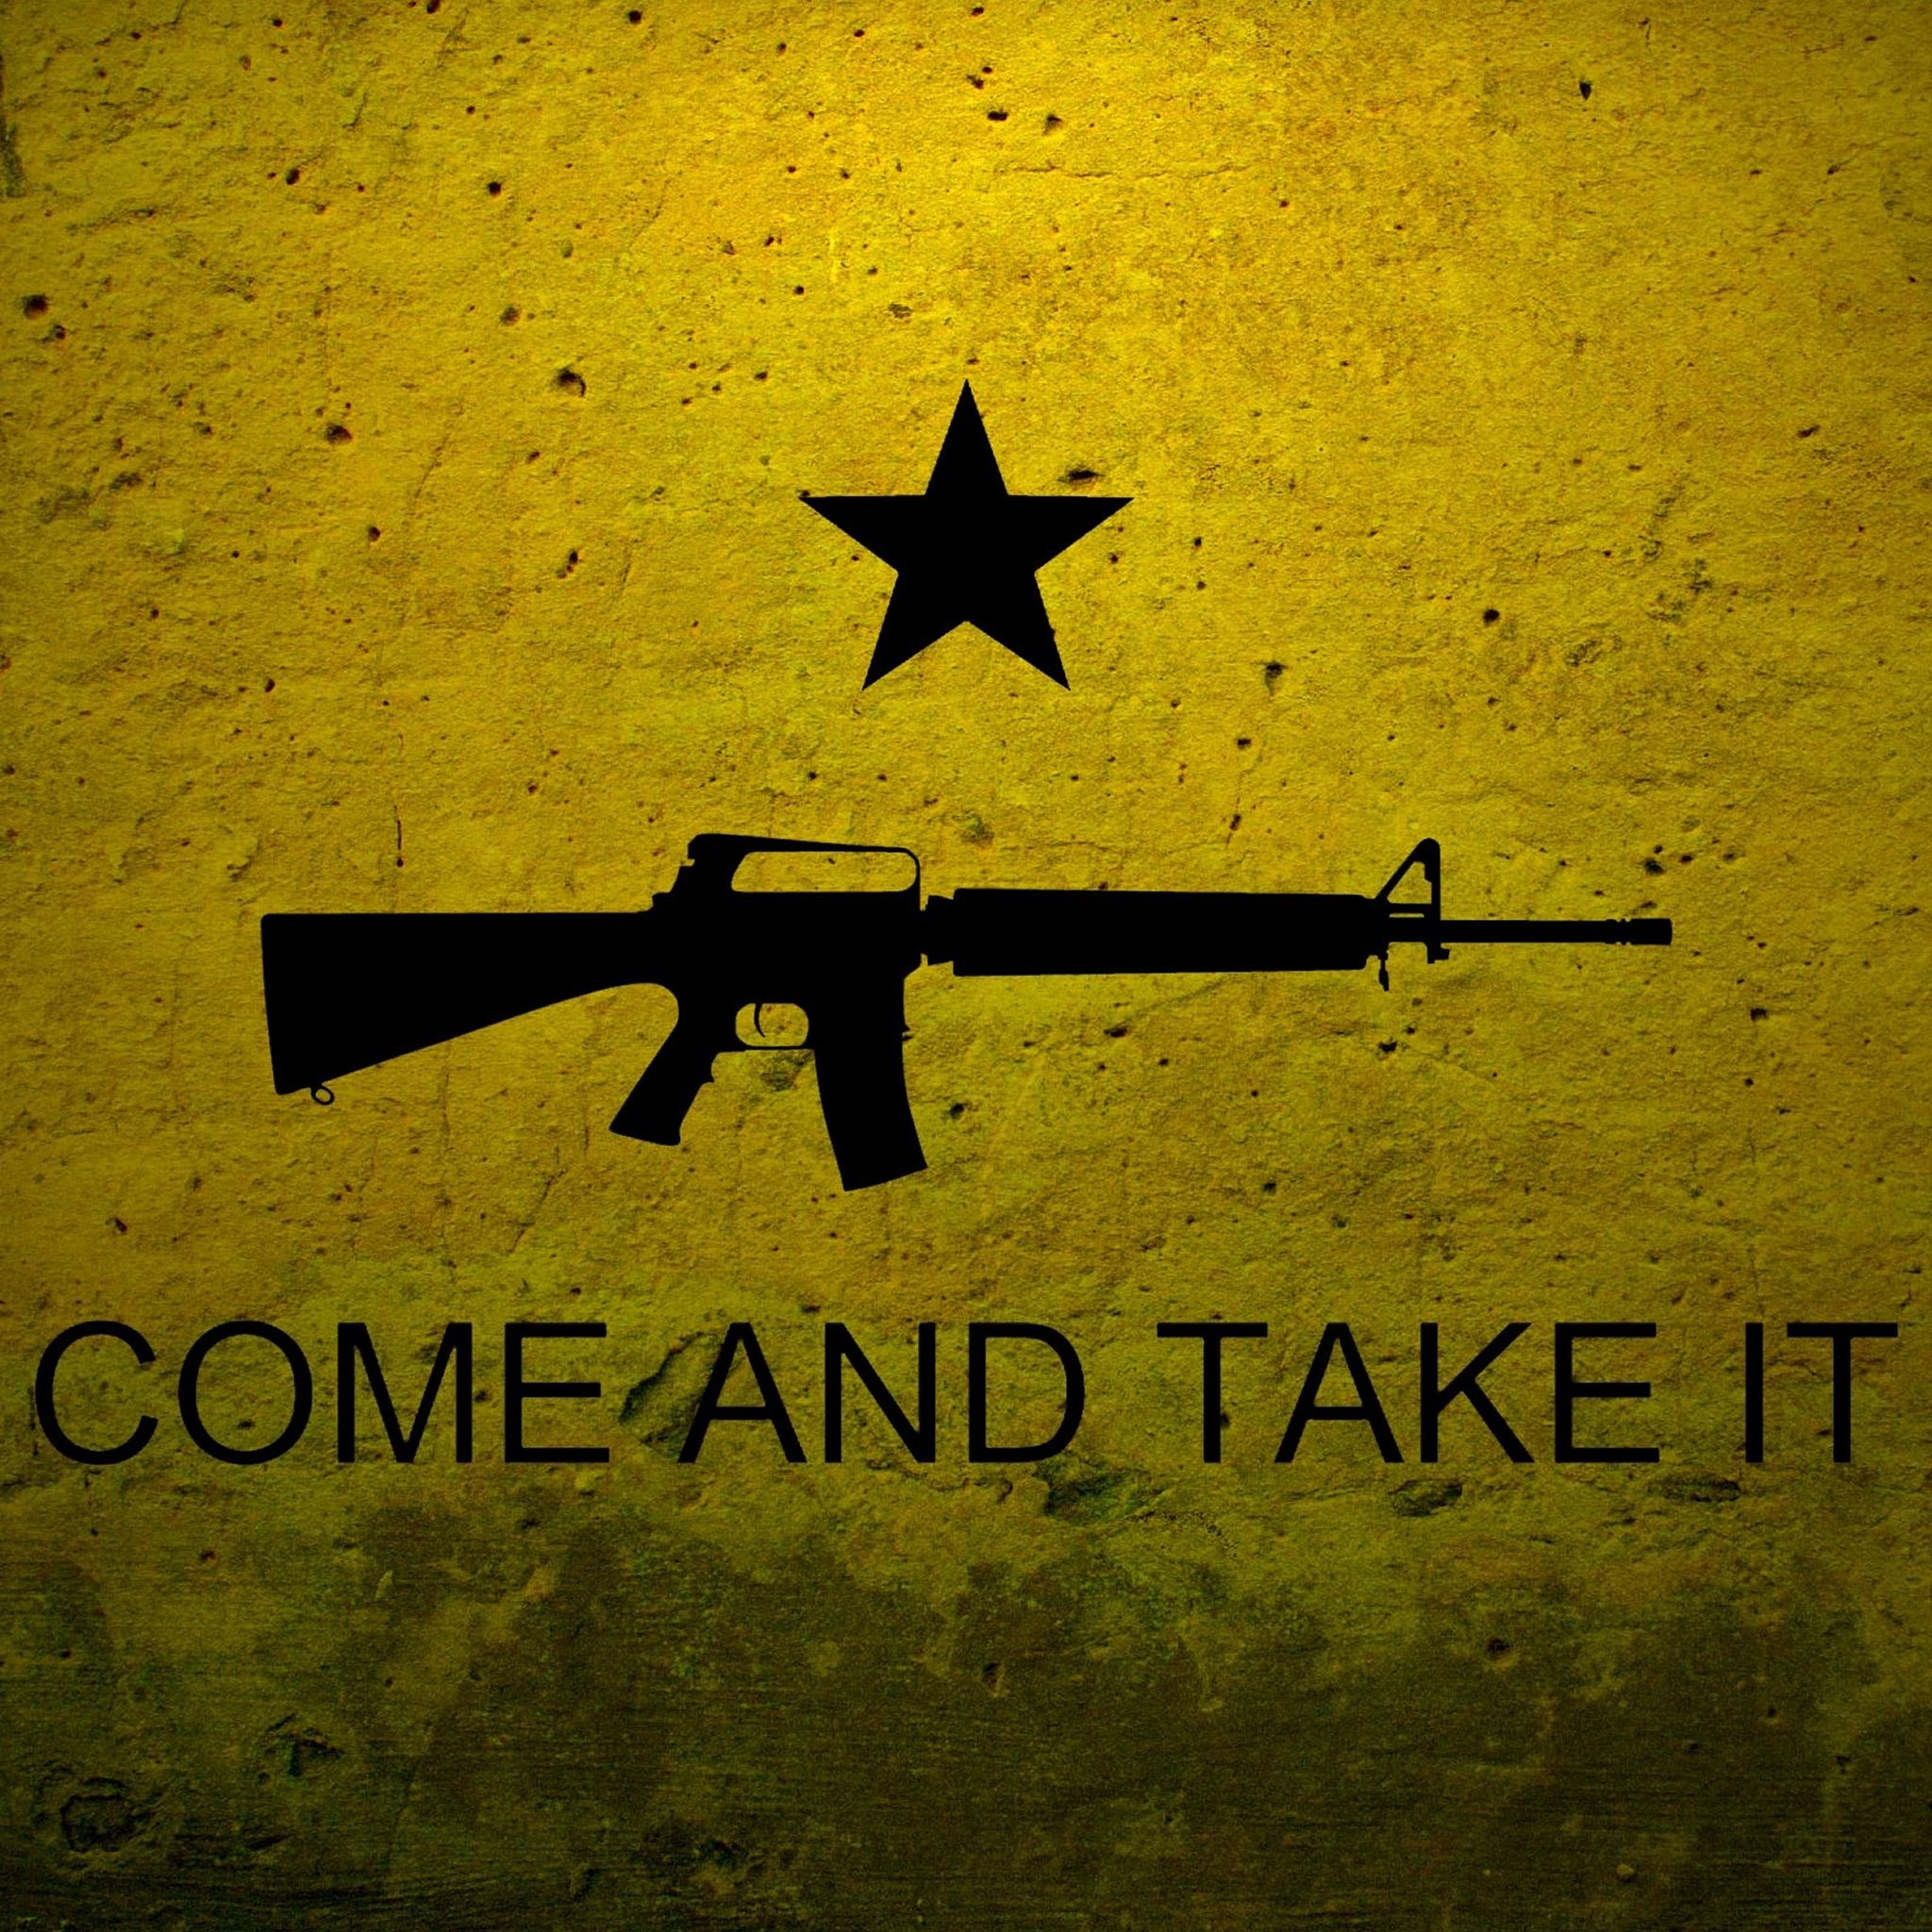 Come and Take it iPad Air wallpaper 